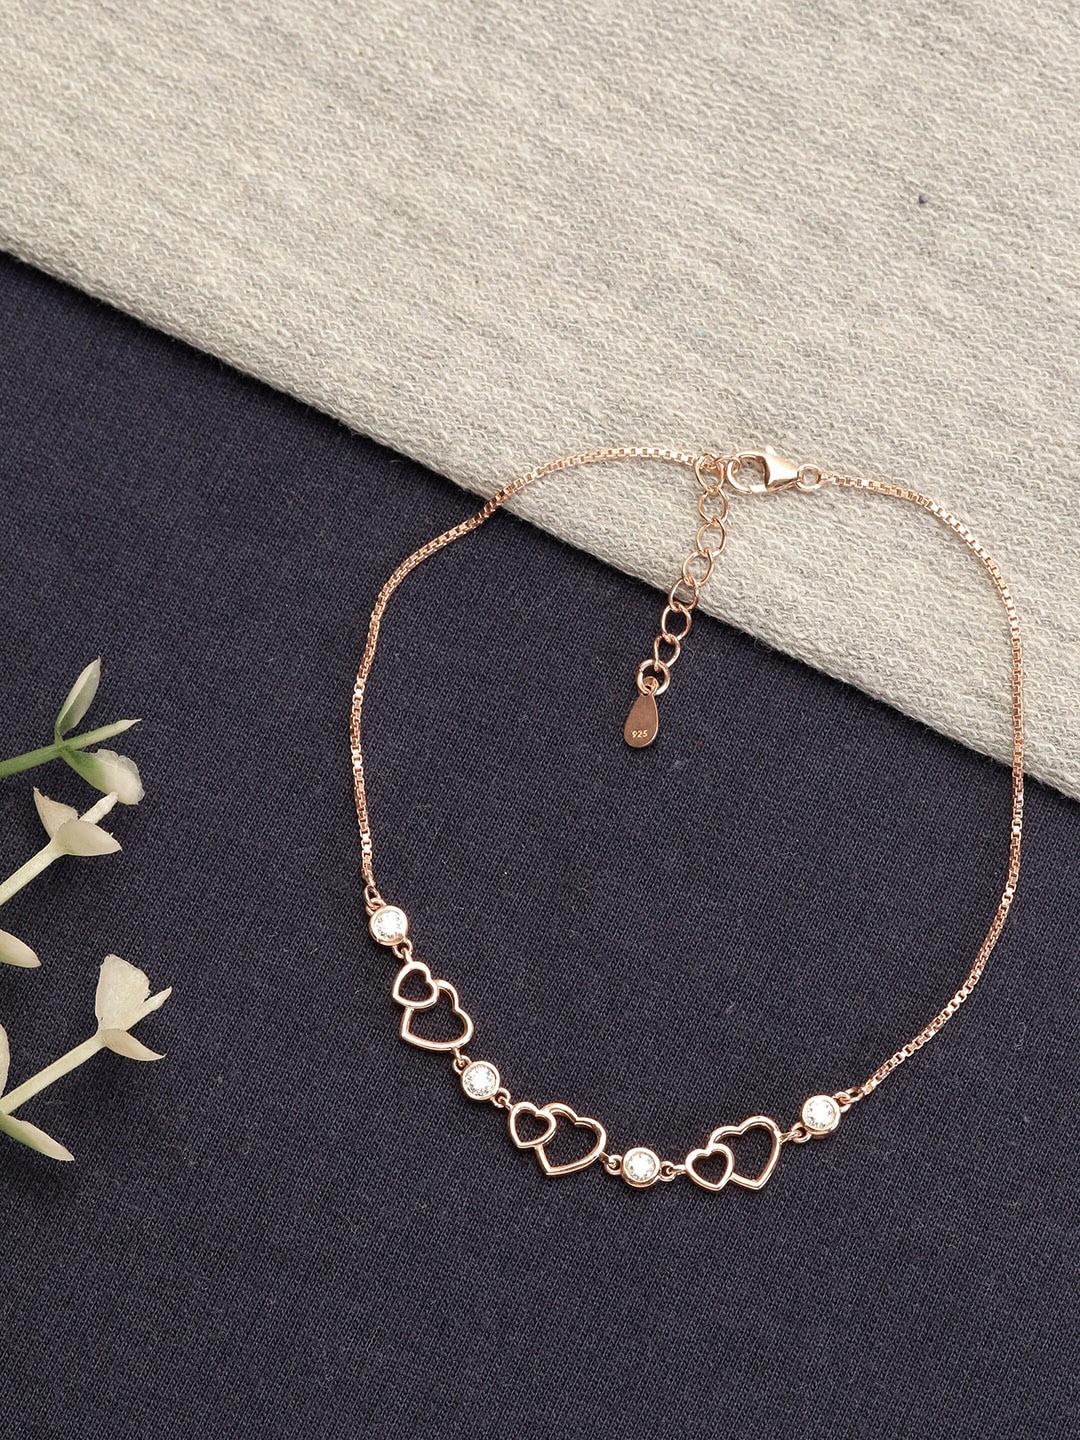 giva 925 sterling silver rose gold plated heart anklet